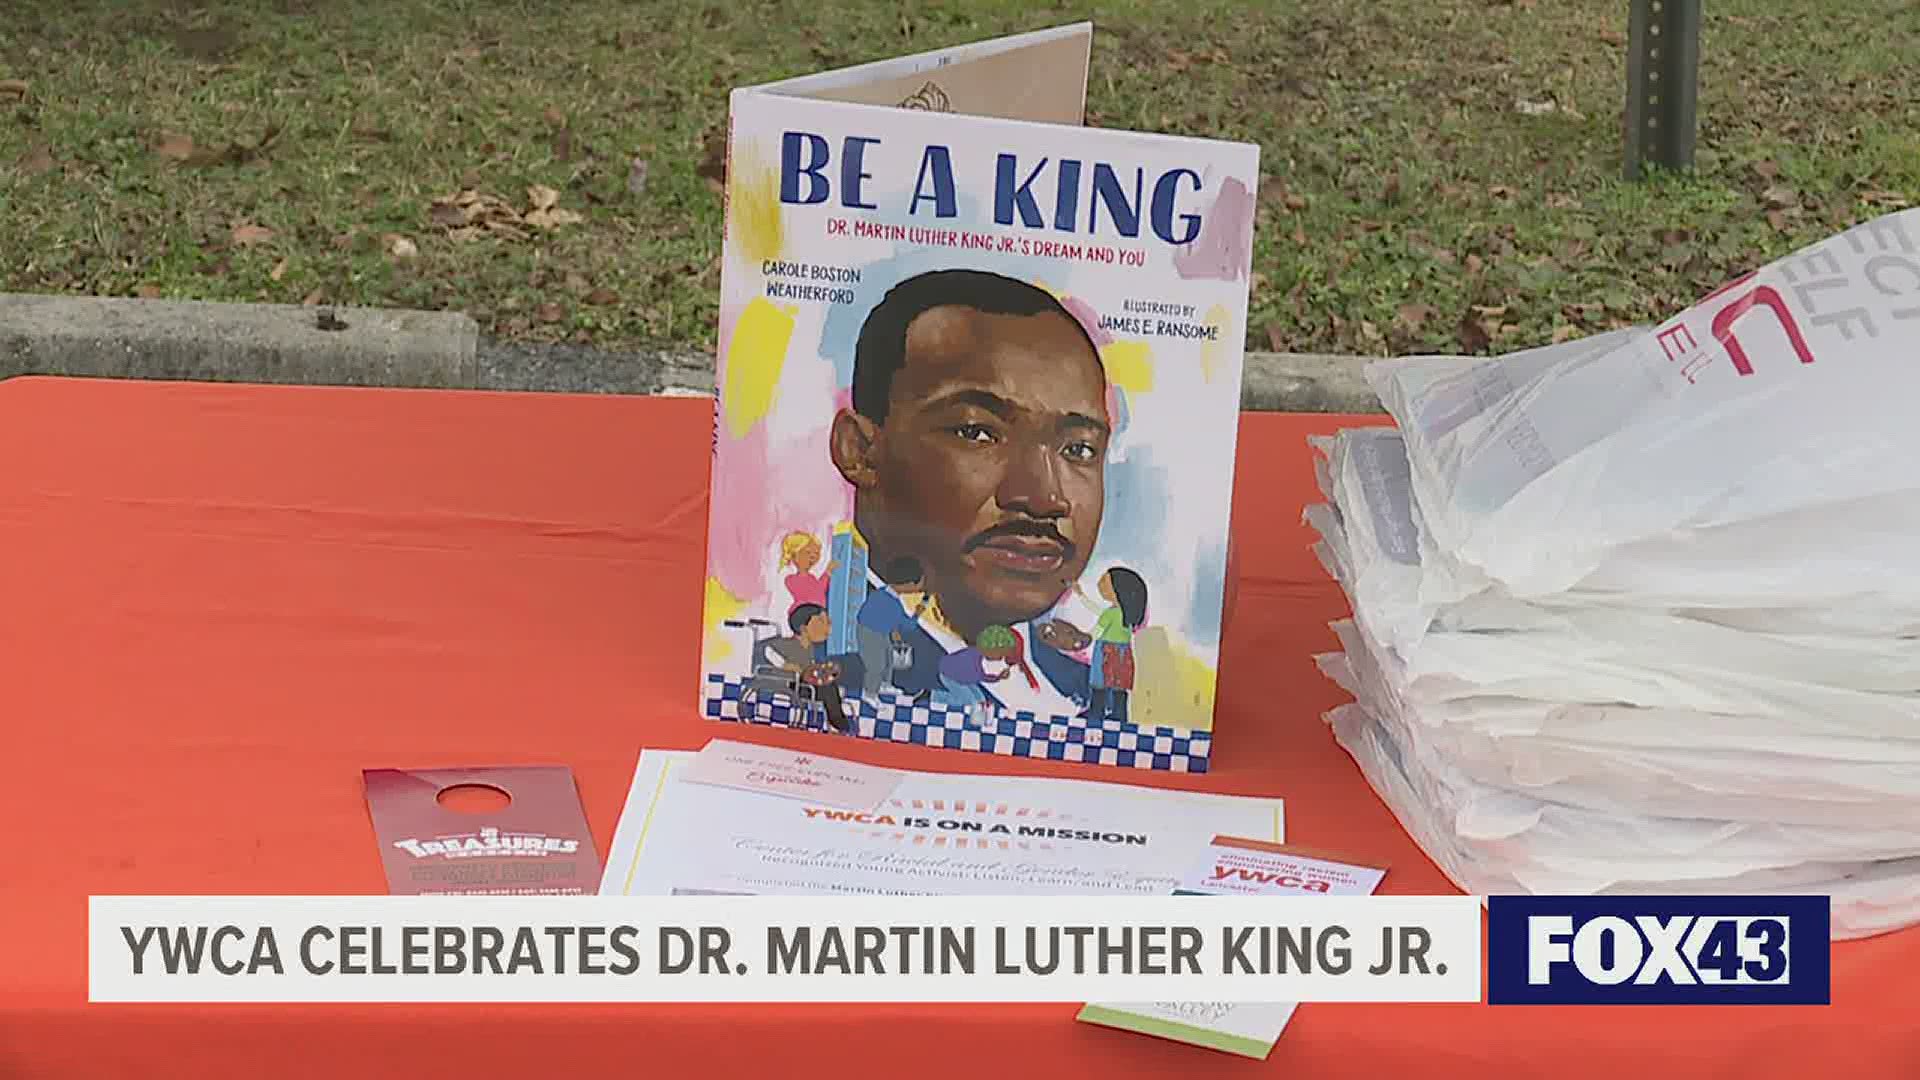 During the event, children learned about the work and legacy of Dr. King during a time of racial reckoning in our country.